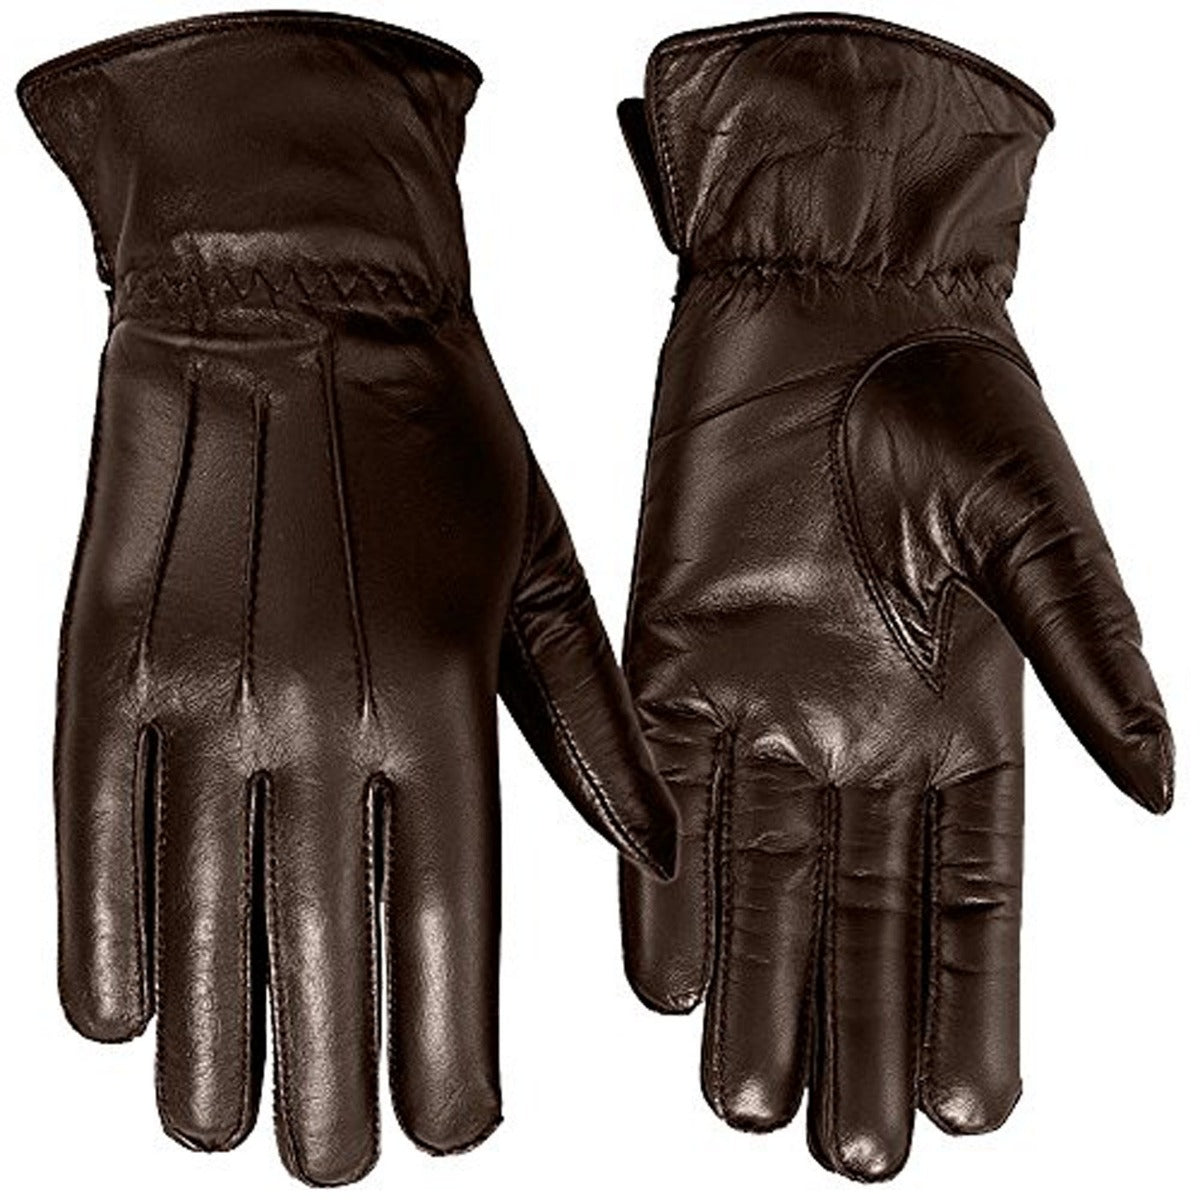 Women's Warm Winter Dress And Work Gloves, Thermal Lining, Genuine Brown Leather